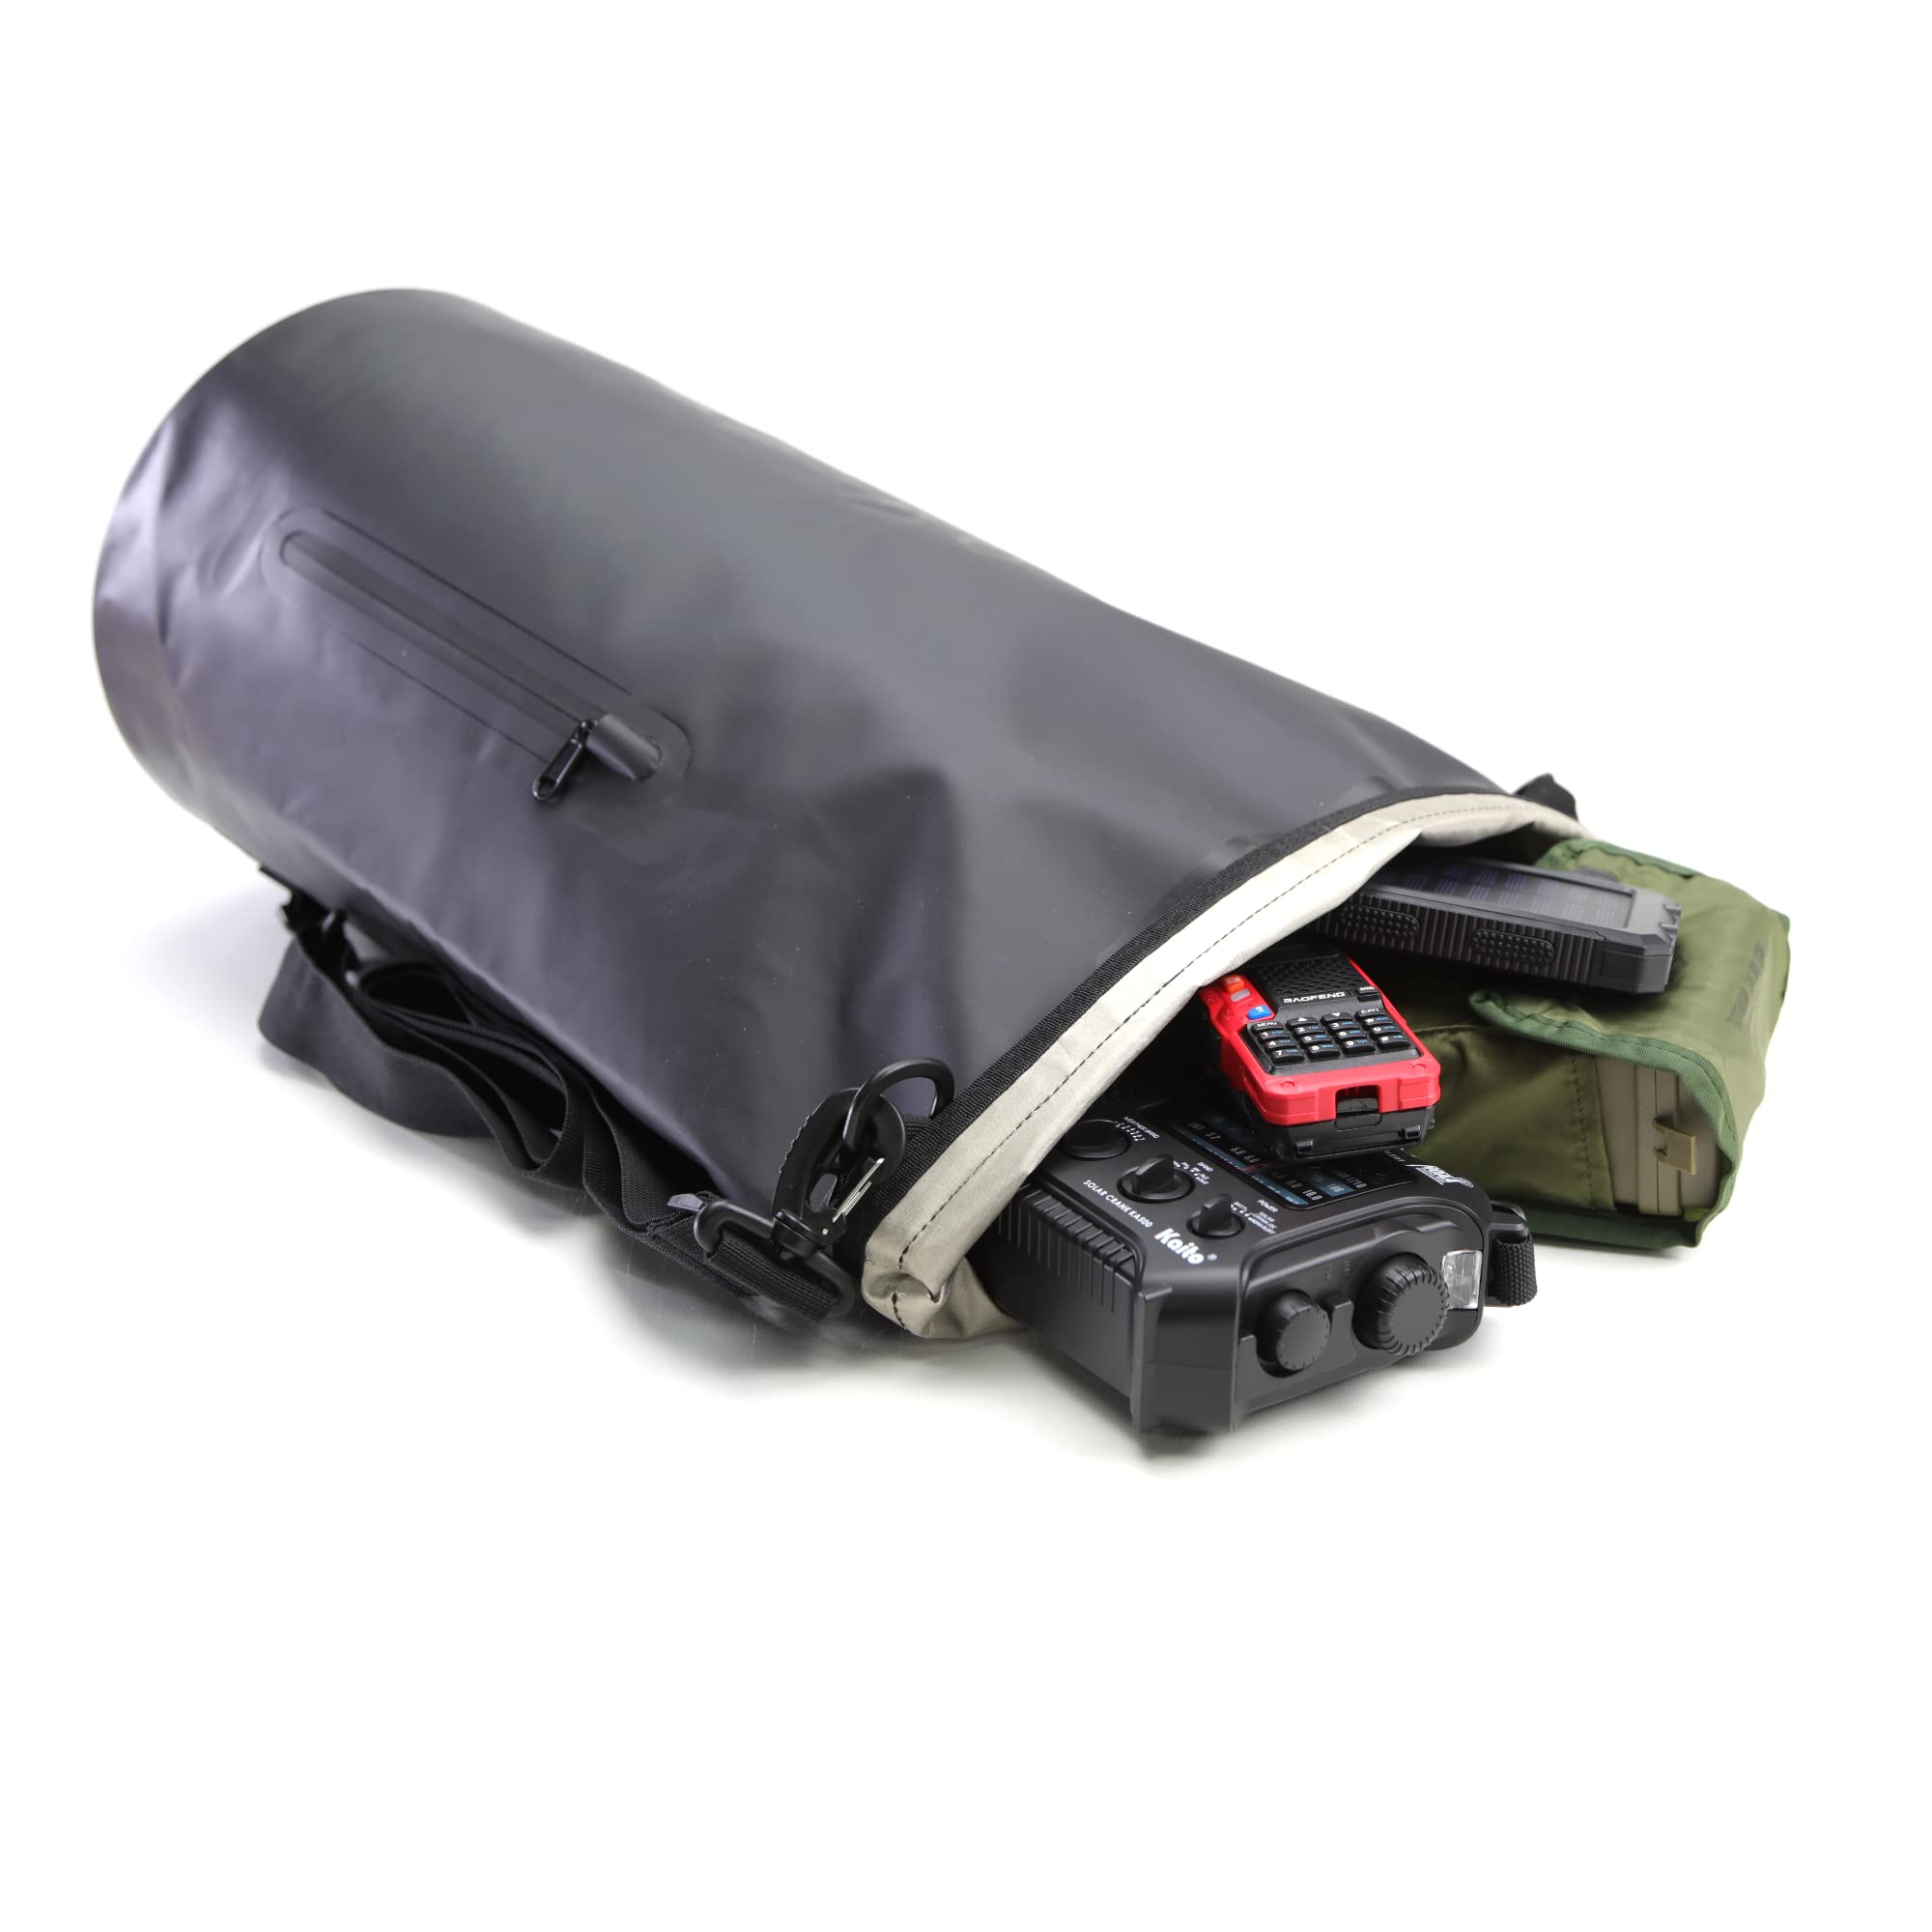 Faraday Defense Waterproof Faraday Dry Bag - Sling Pack - Fast, Easy Access for Device Shielding - Protect Data and Devices from Hacking, Tracking, EMP… (20L)